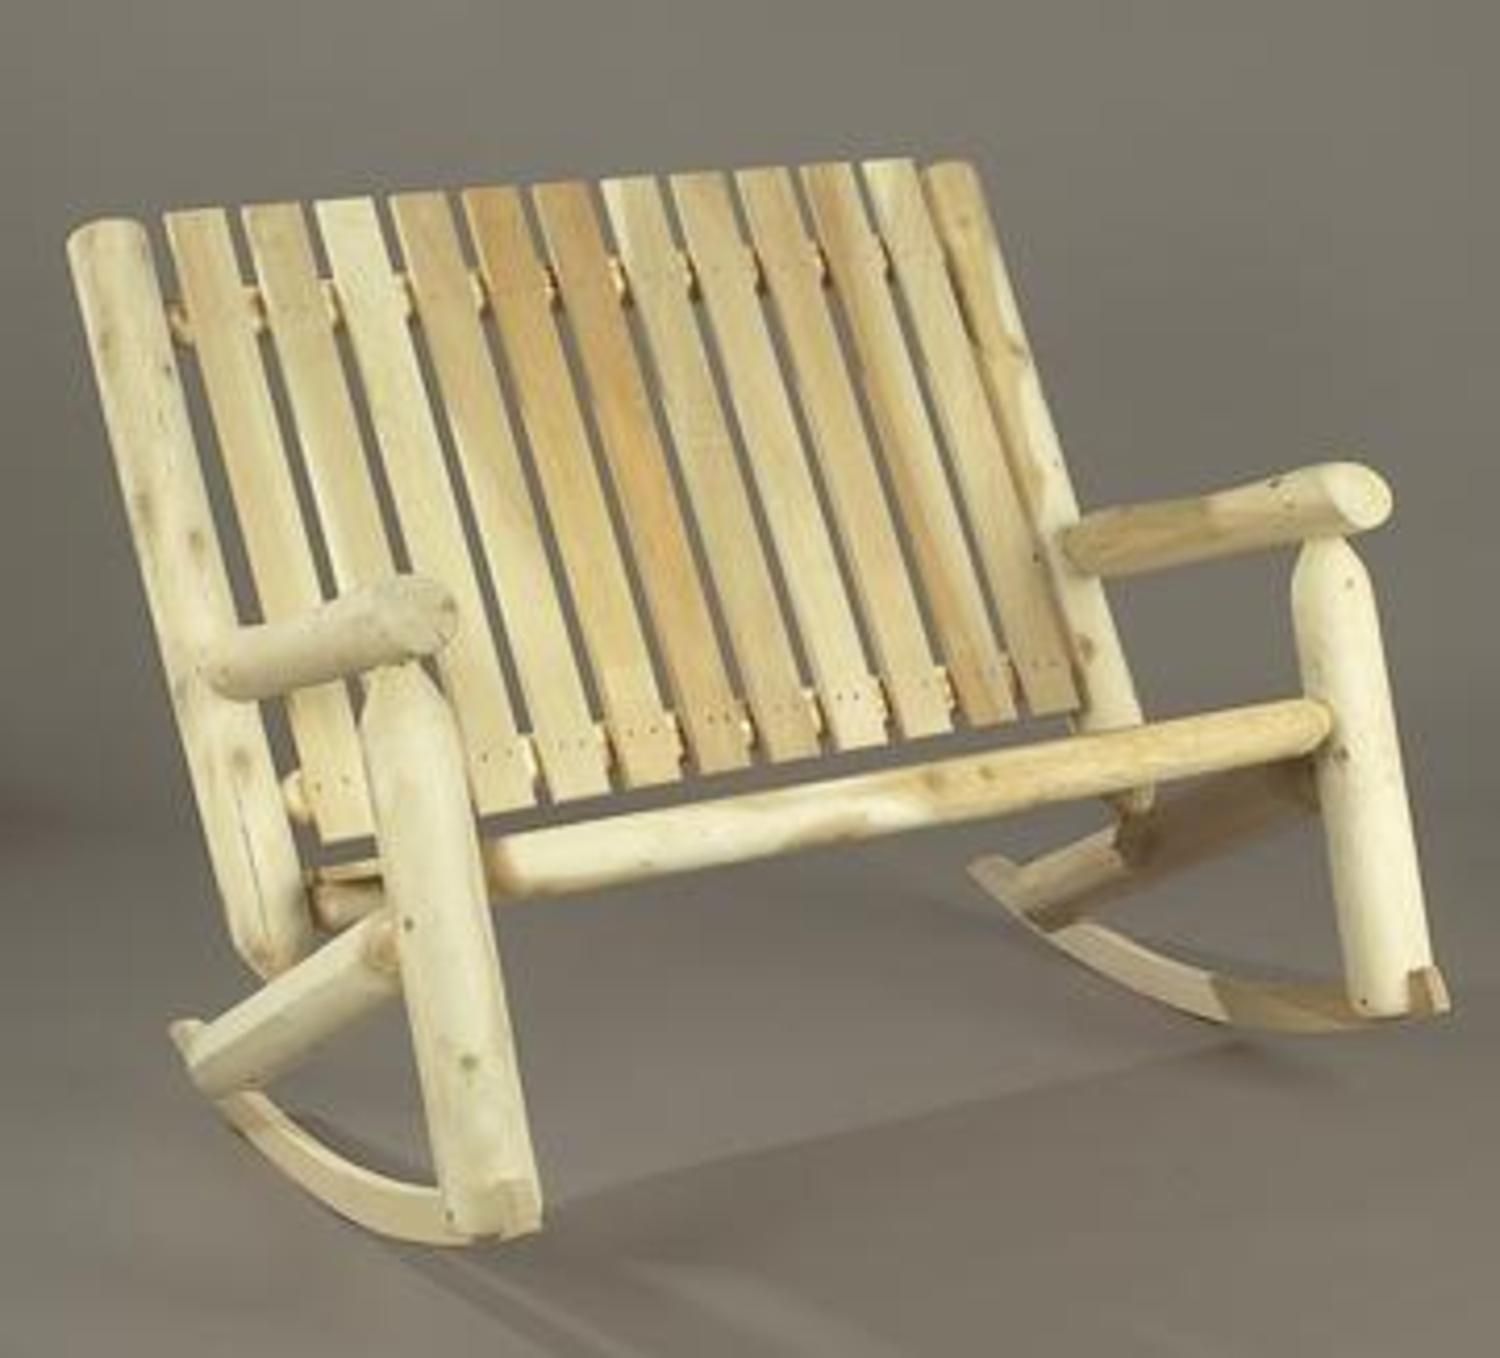 46" Natural Cedar Log Style Outdoor Wooden Double High Back Rocking Within Natural Wood Outdoor Chairs (View 6 of 15)